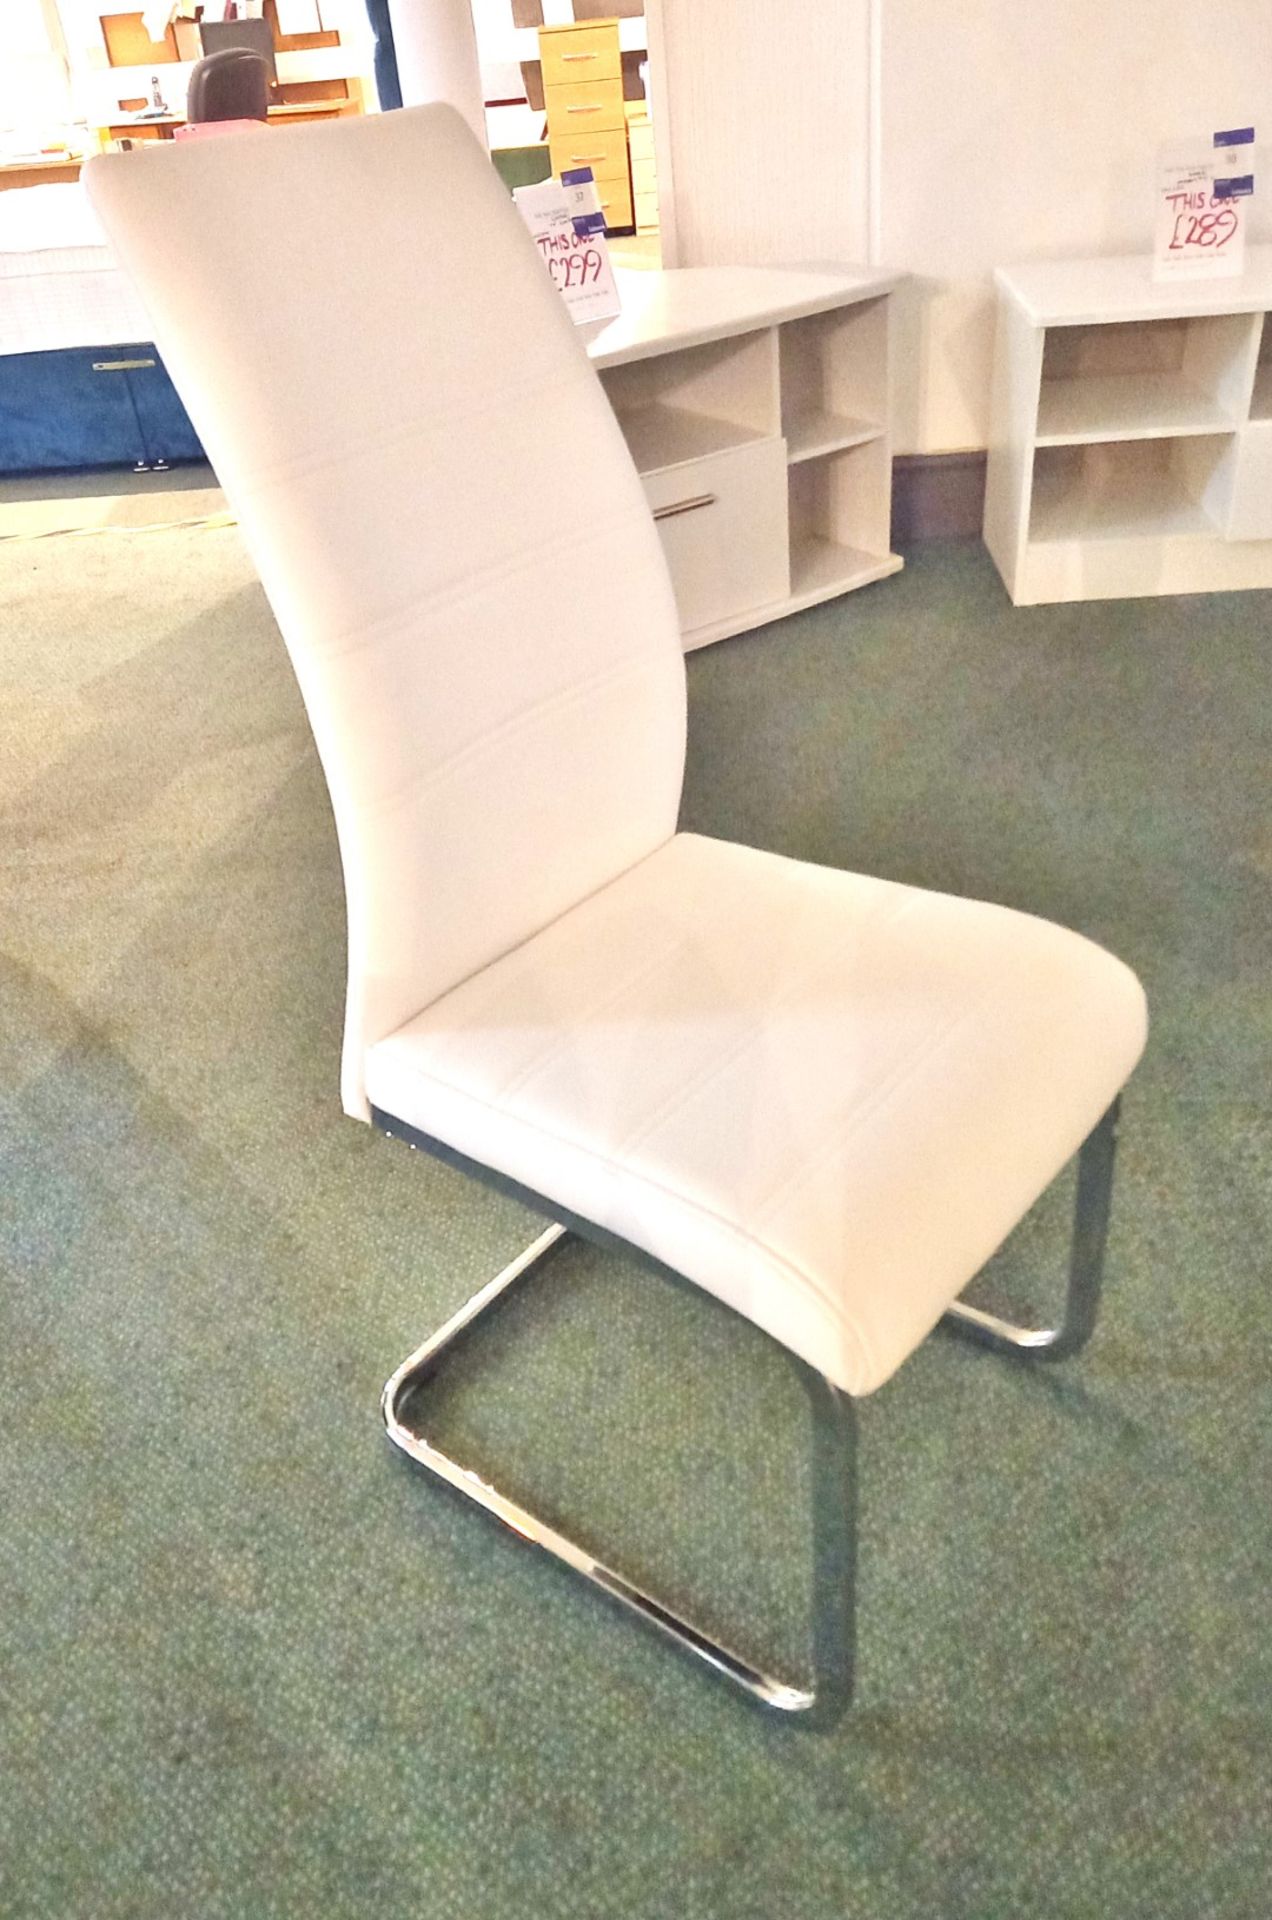 White Table & 4 Chairs (1500 x 900) Rrp. £749 - Image 5 of 6